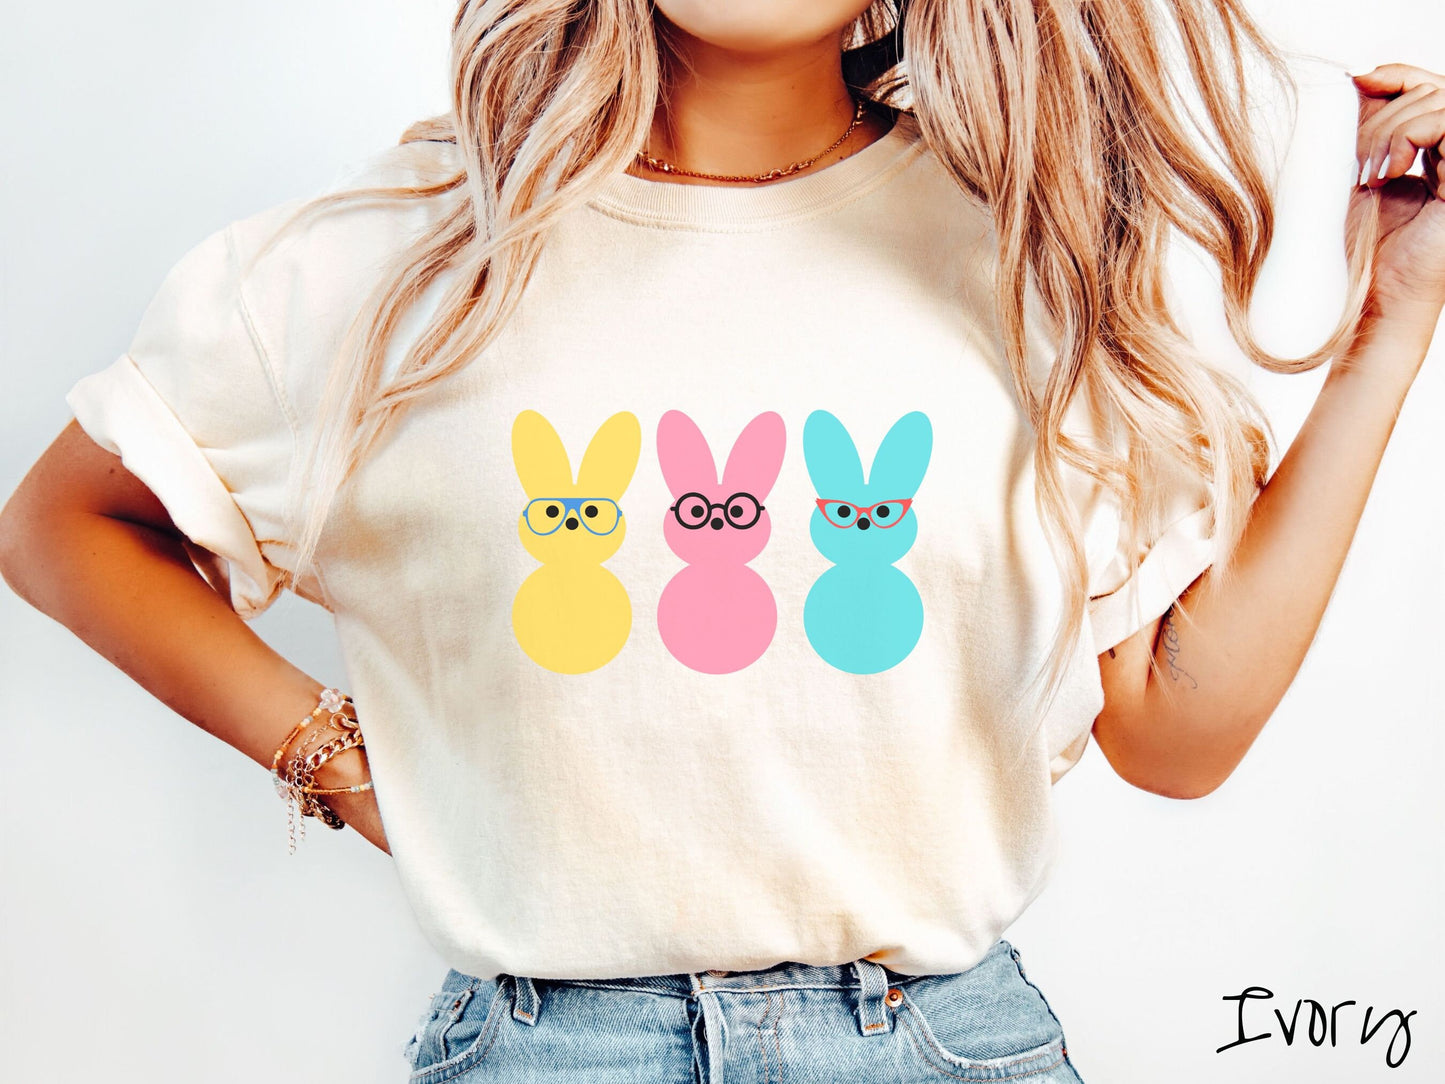 A woman wearing a cute, vintage ivory colored shirt with three peep-like rabbits on the front. One is yellow and wearing blue glasses, the middle is pink with black glasses, and the one on the right is light blue with red glasses.